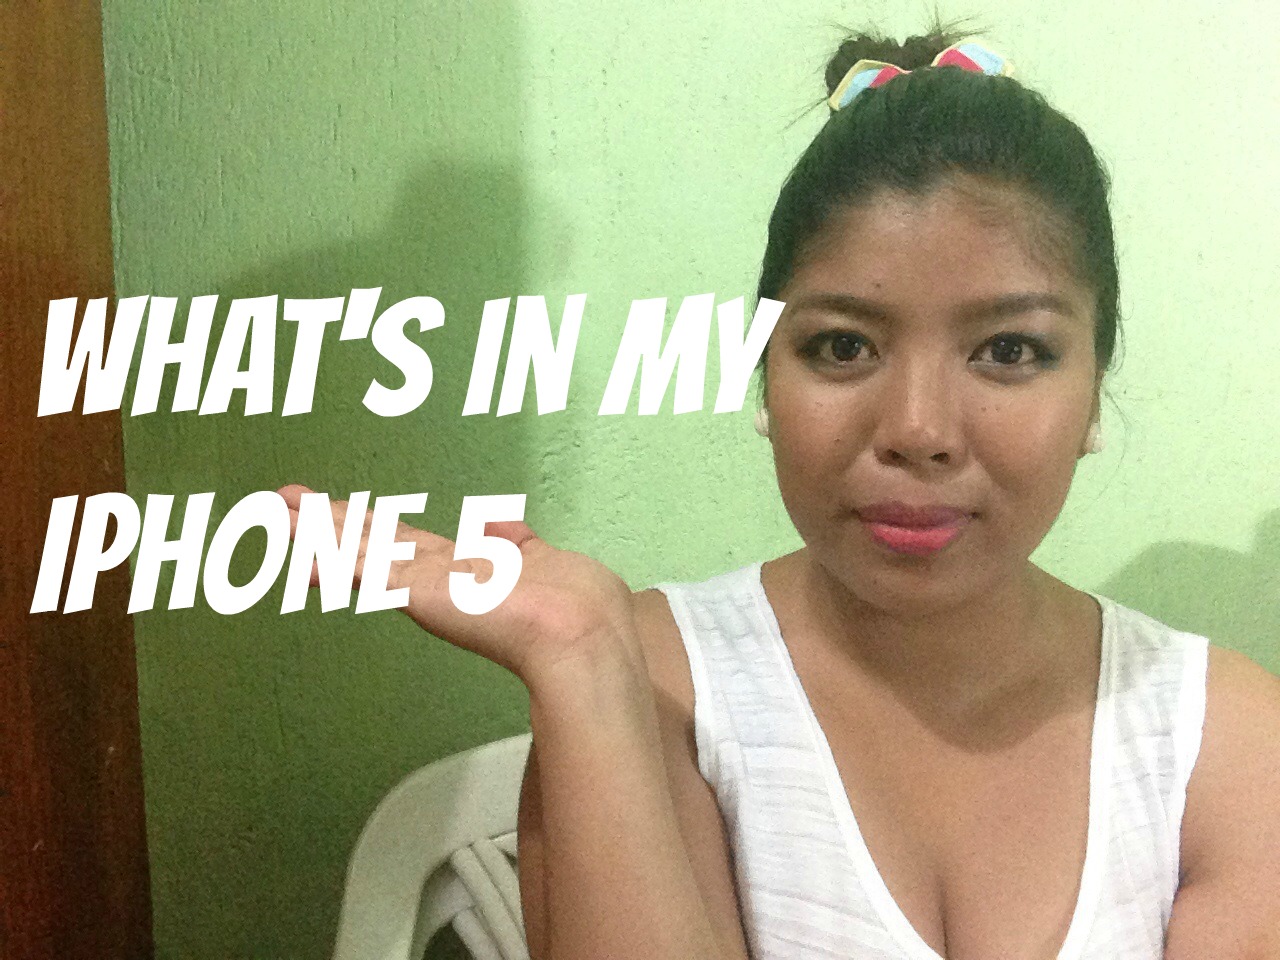 YouTuber Vlogger What's in my iPhone 5 Tag